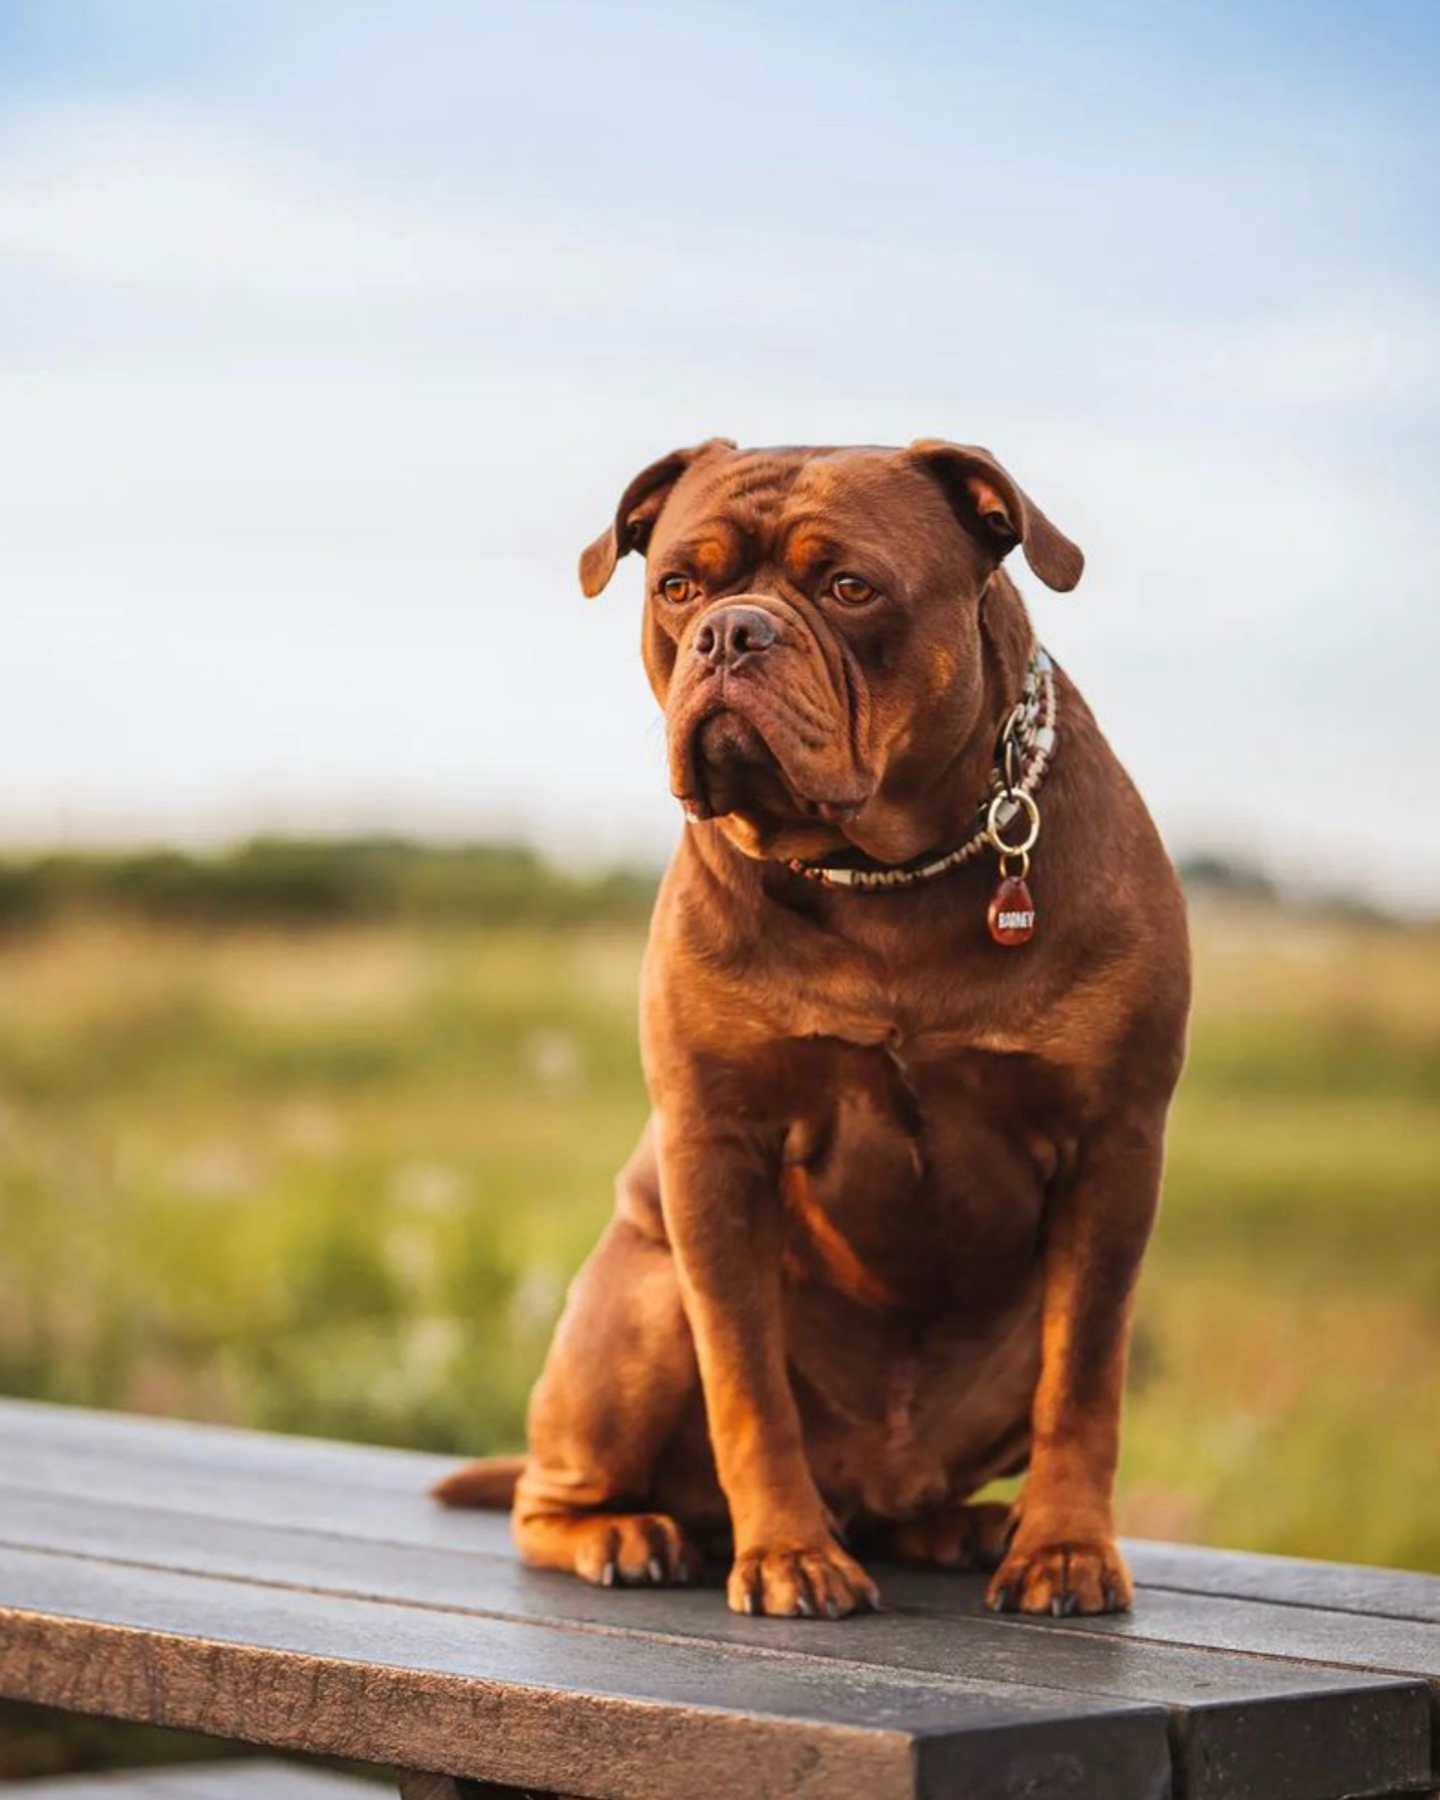 An Olde English Bulldogge enjoying his time in nature with his owners